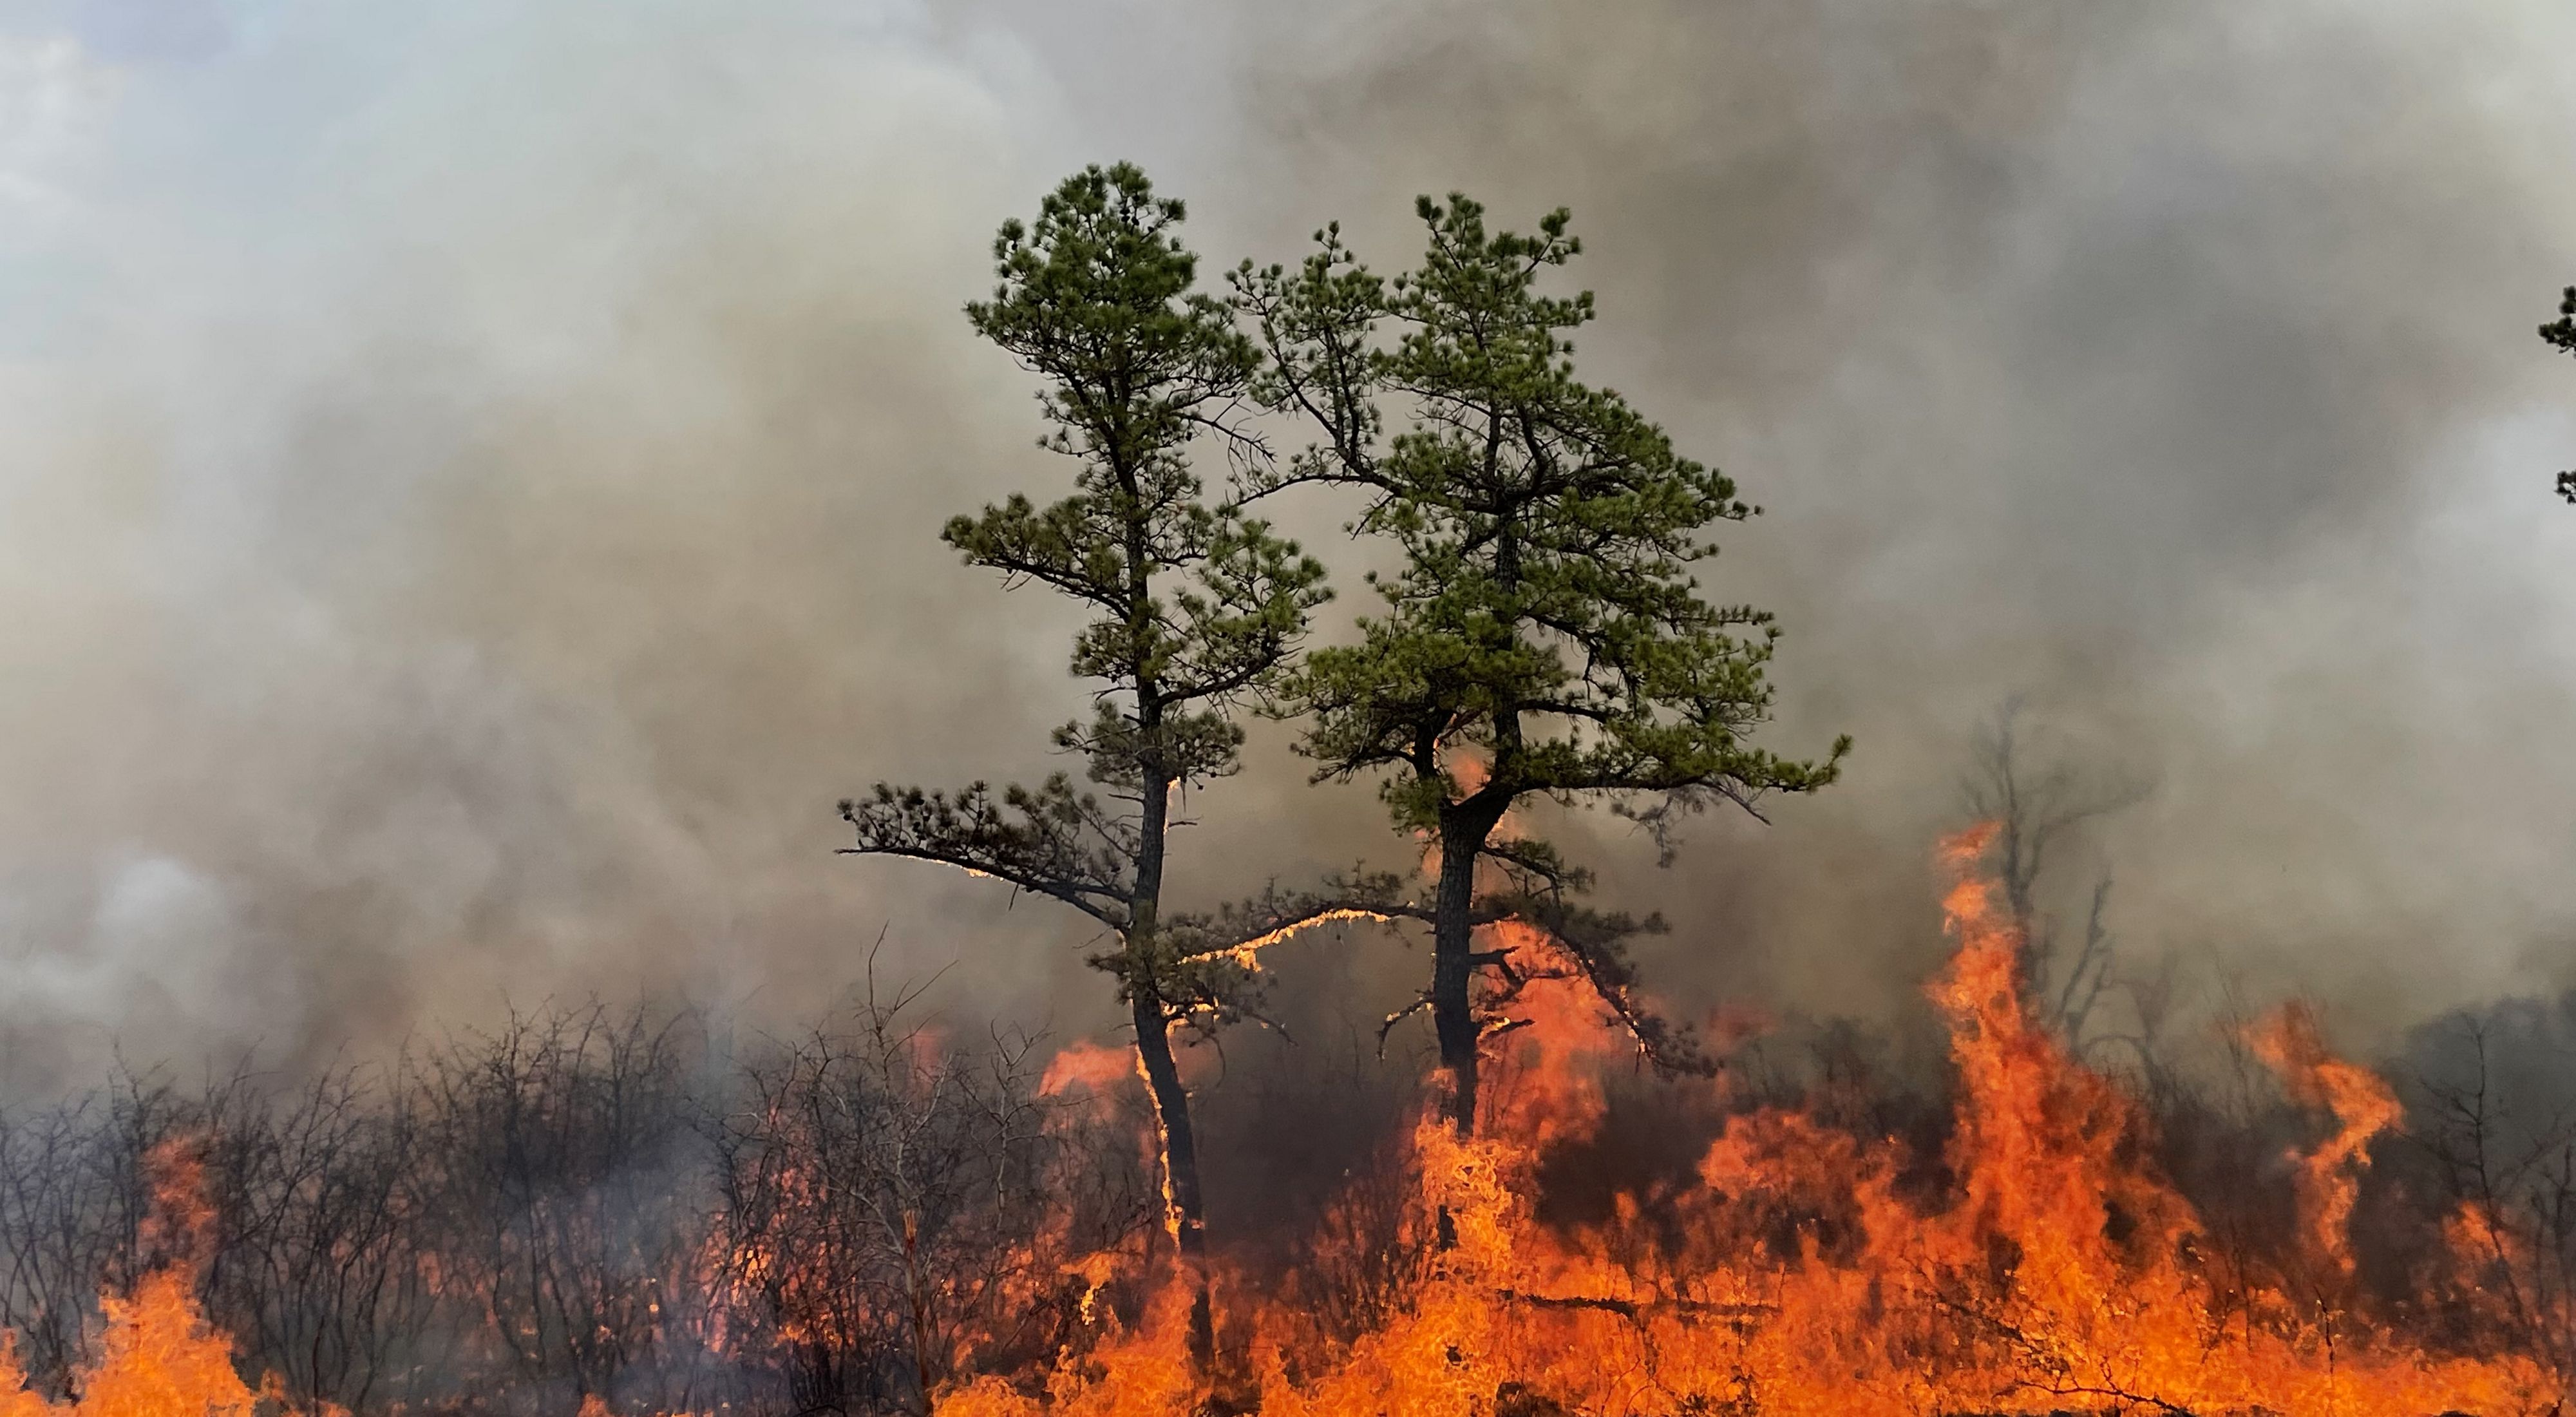 A fire burns over a field and up two pine trees as grey smoke fills the sky.